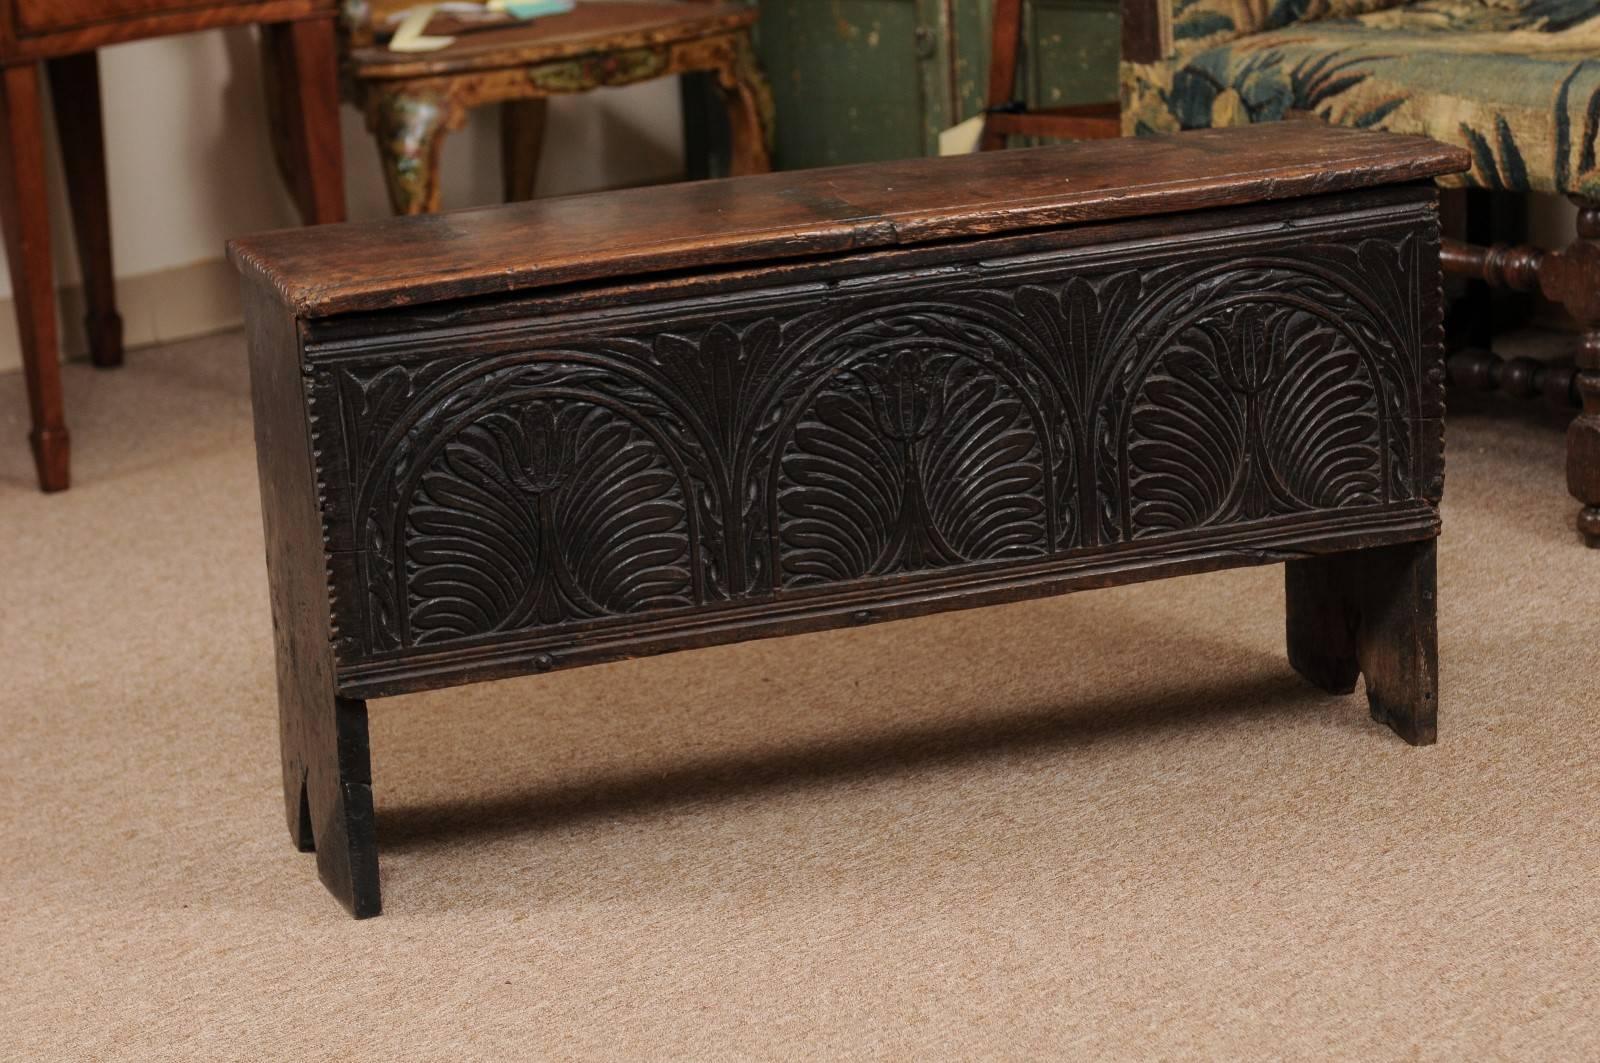 Petite Footed Oak Coffer with Hinged Lid and Carved Front Panel featuring Tulip Motif, 18th Century England. 